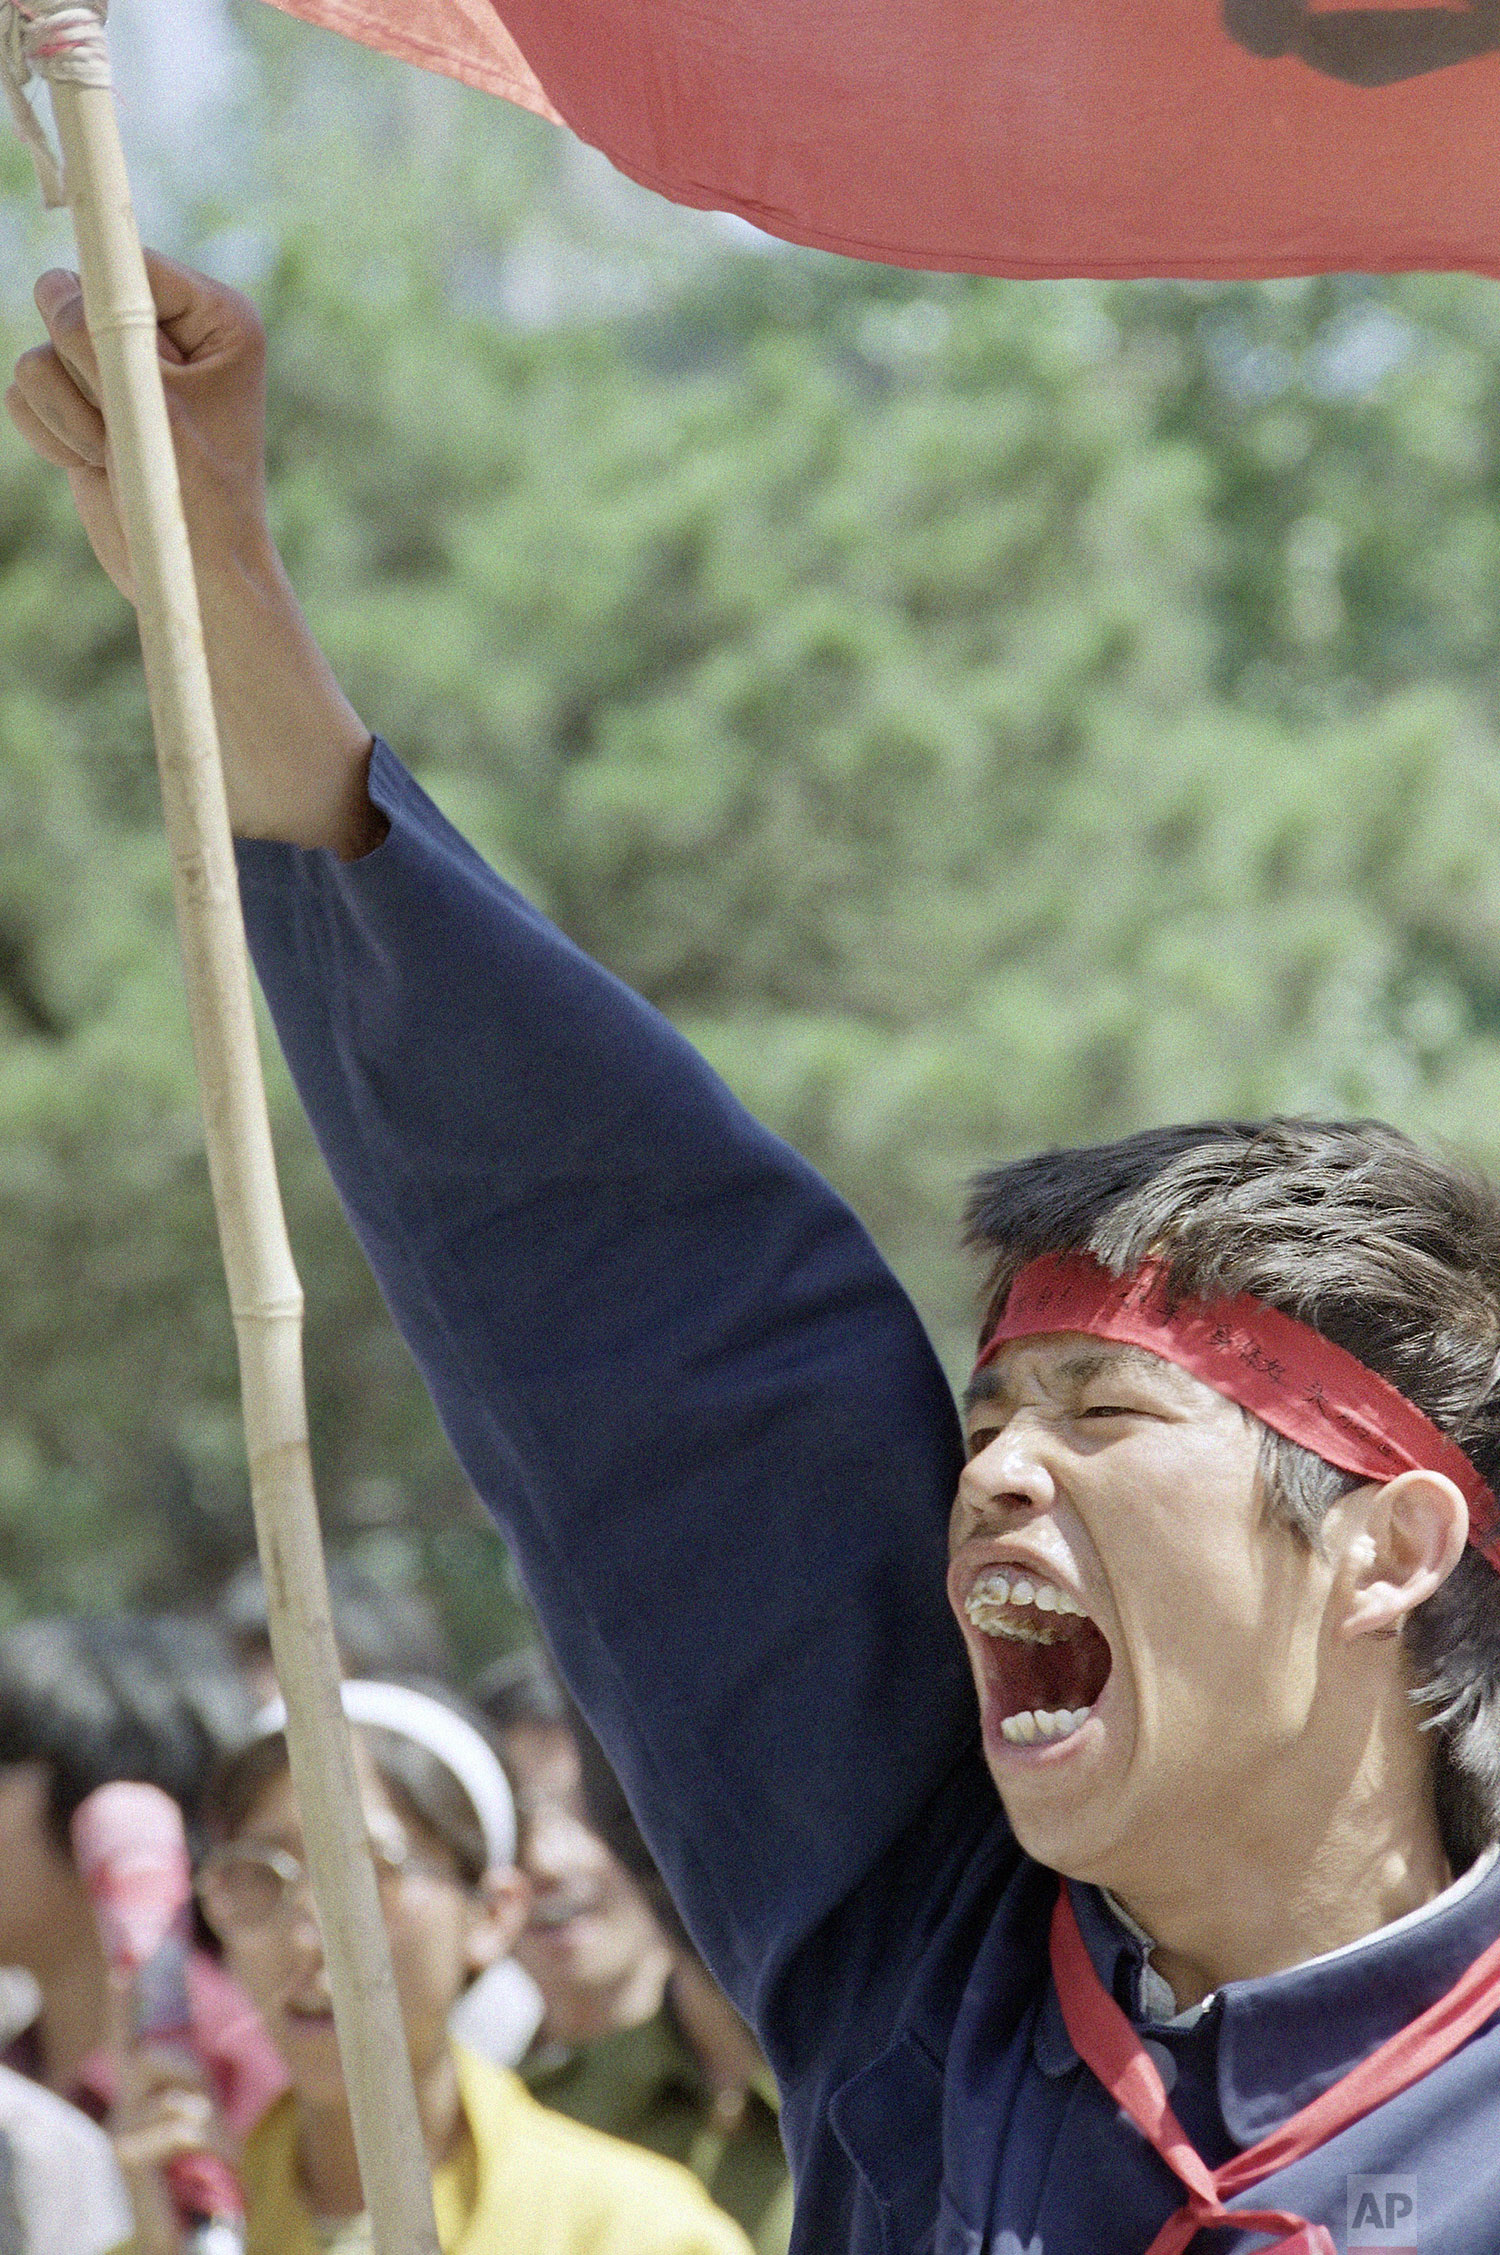  A Beijing University student sounds off during a rally in Tiananmen Square, Thursday, May 25, 1989 in Beijing. (AP Photo/Liu Heung Shing) 